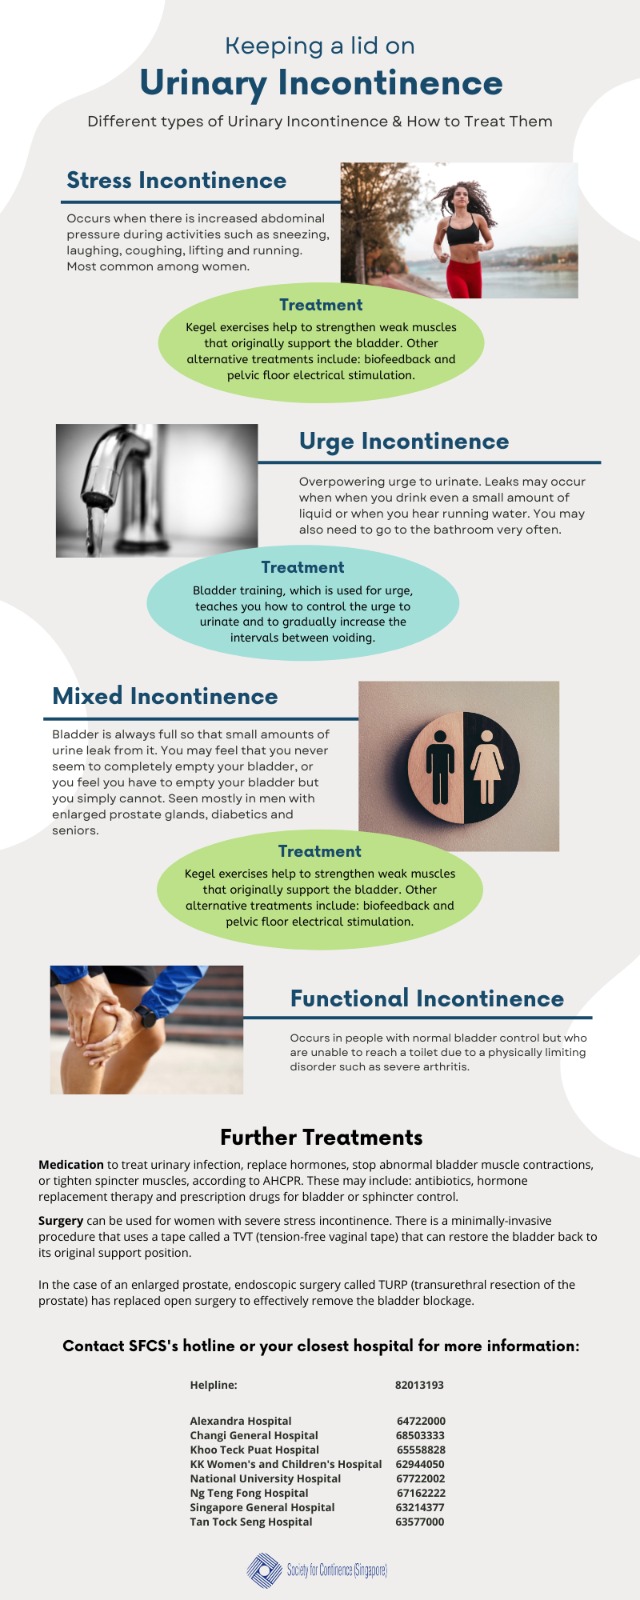 Keeping a lid on Urinary Incontinence - Society for Continence (Singapore)